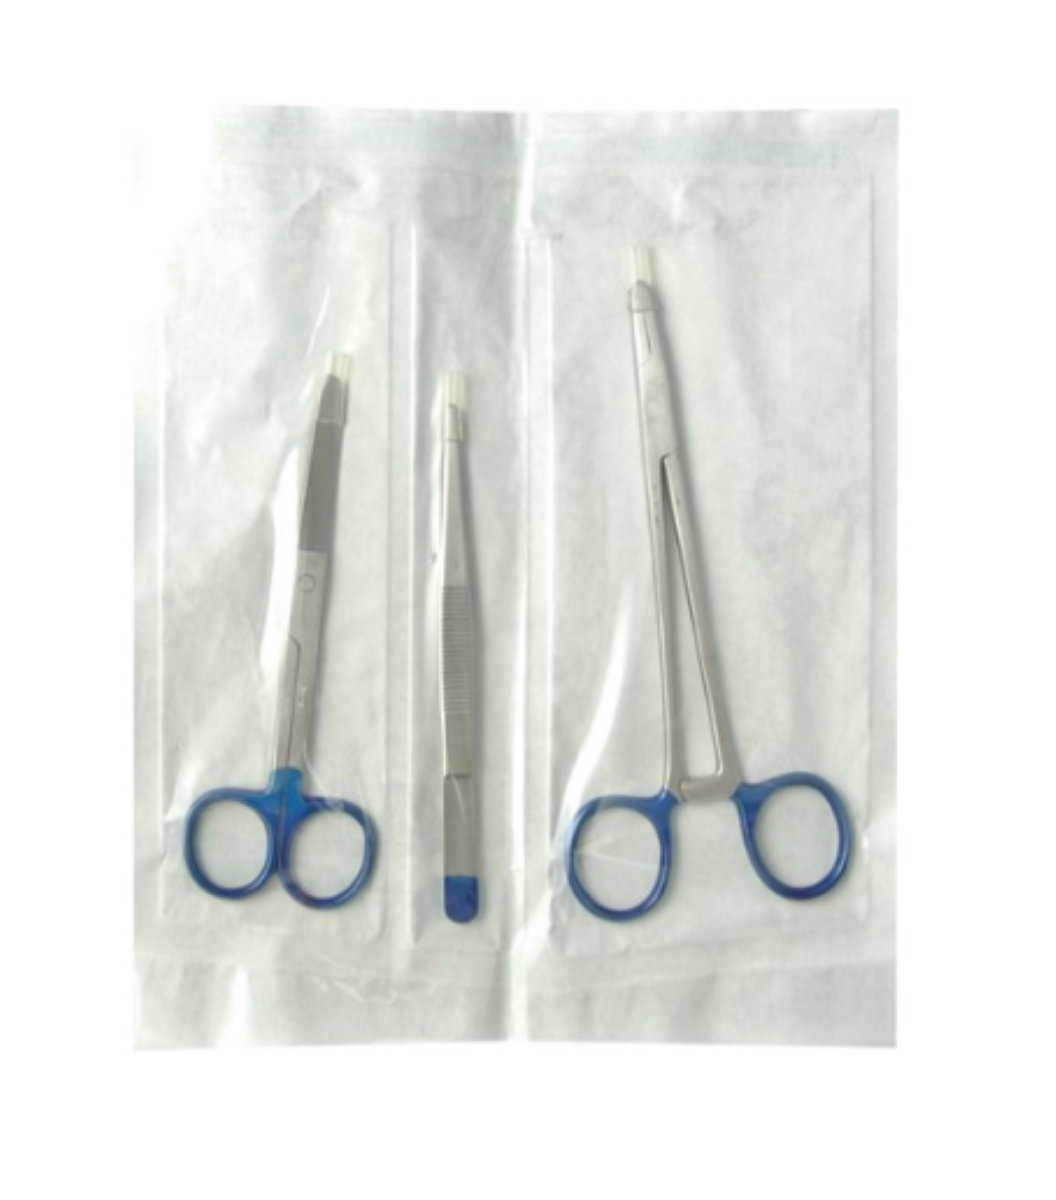 SAGE STERILE INSTRUMENT PACK #4 / SUTURE PACK photo